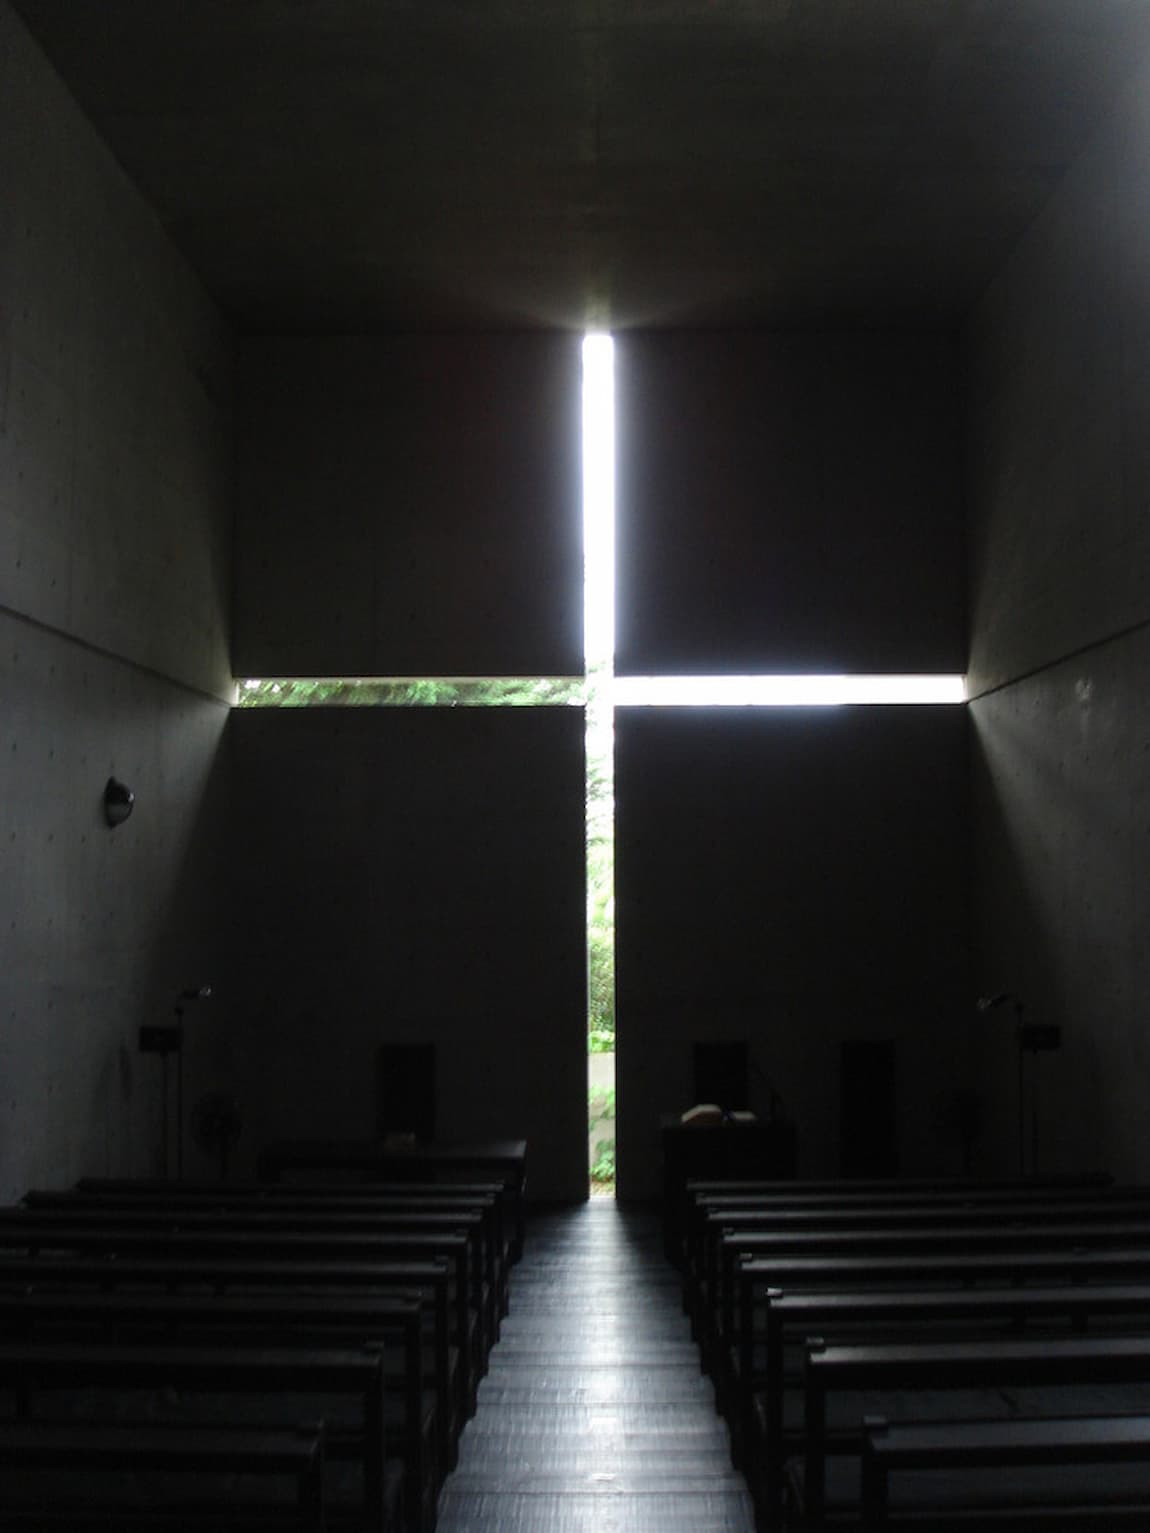 The World’s Most Absolutely Amazing And Beautiful Architecture—Church of the Light in Osaka, Japan.